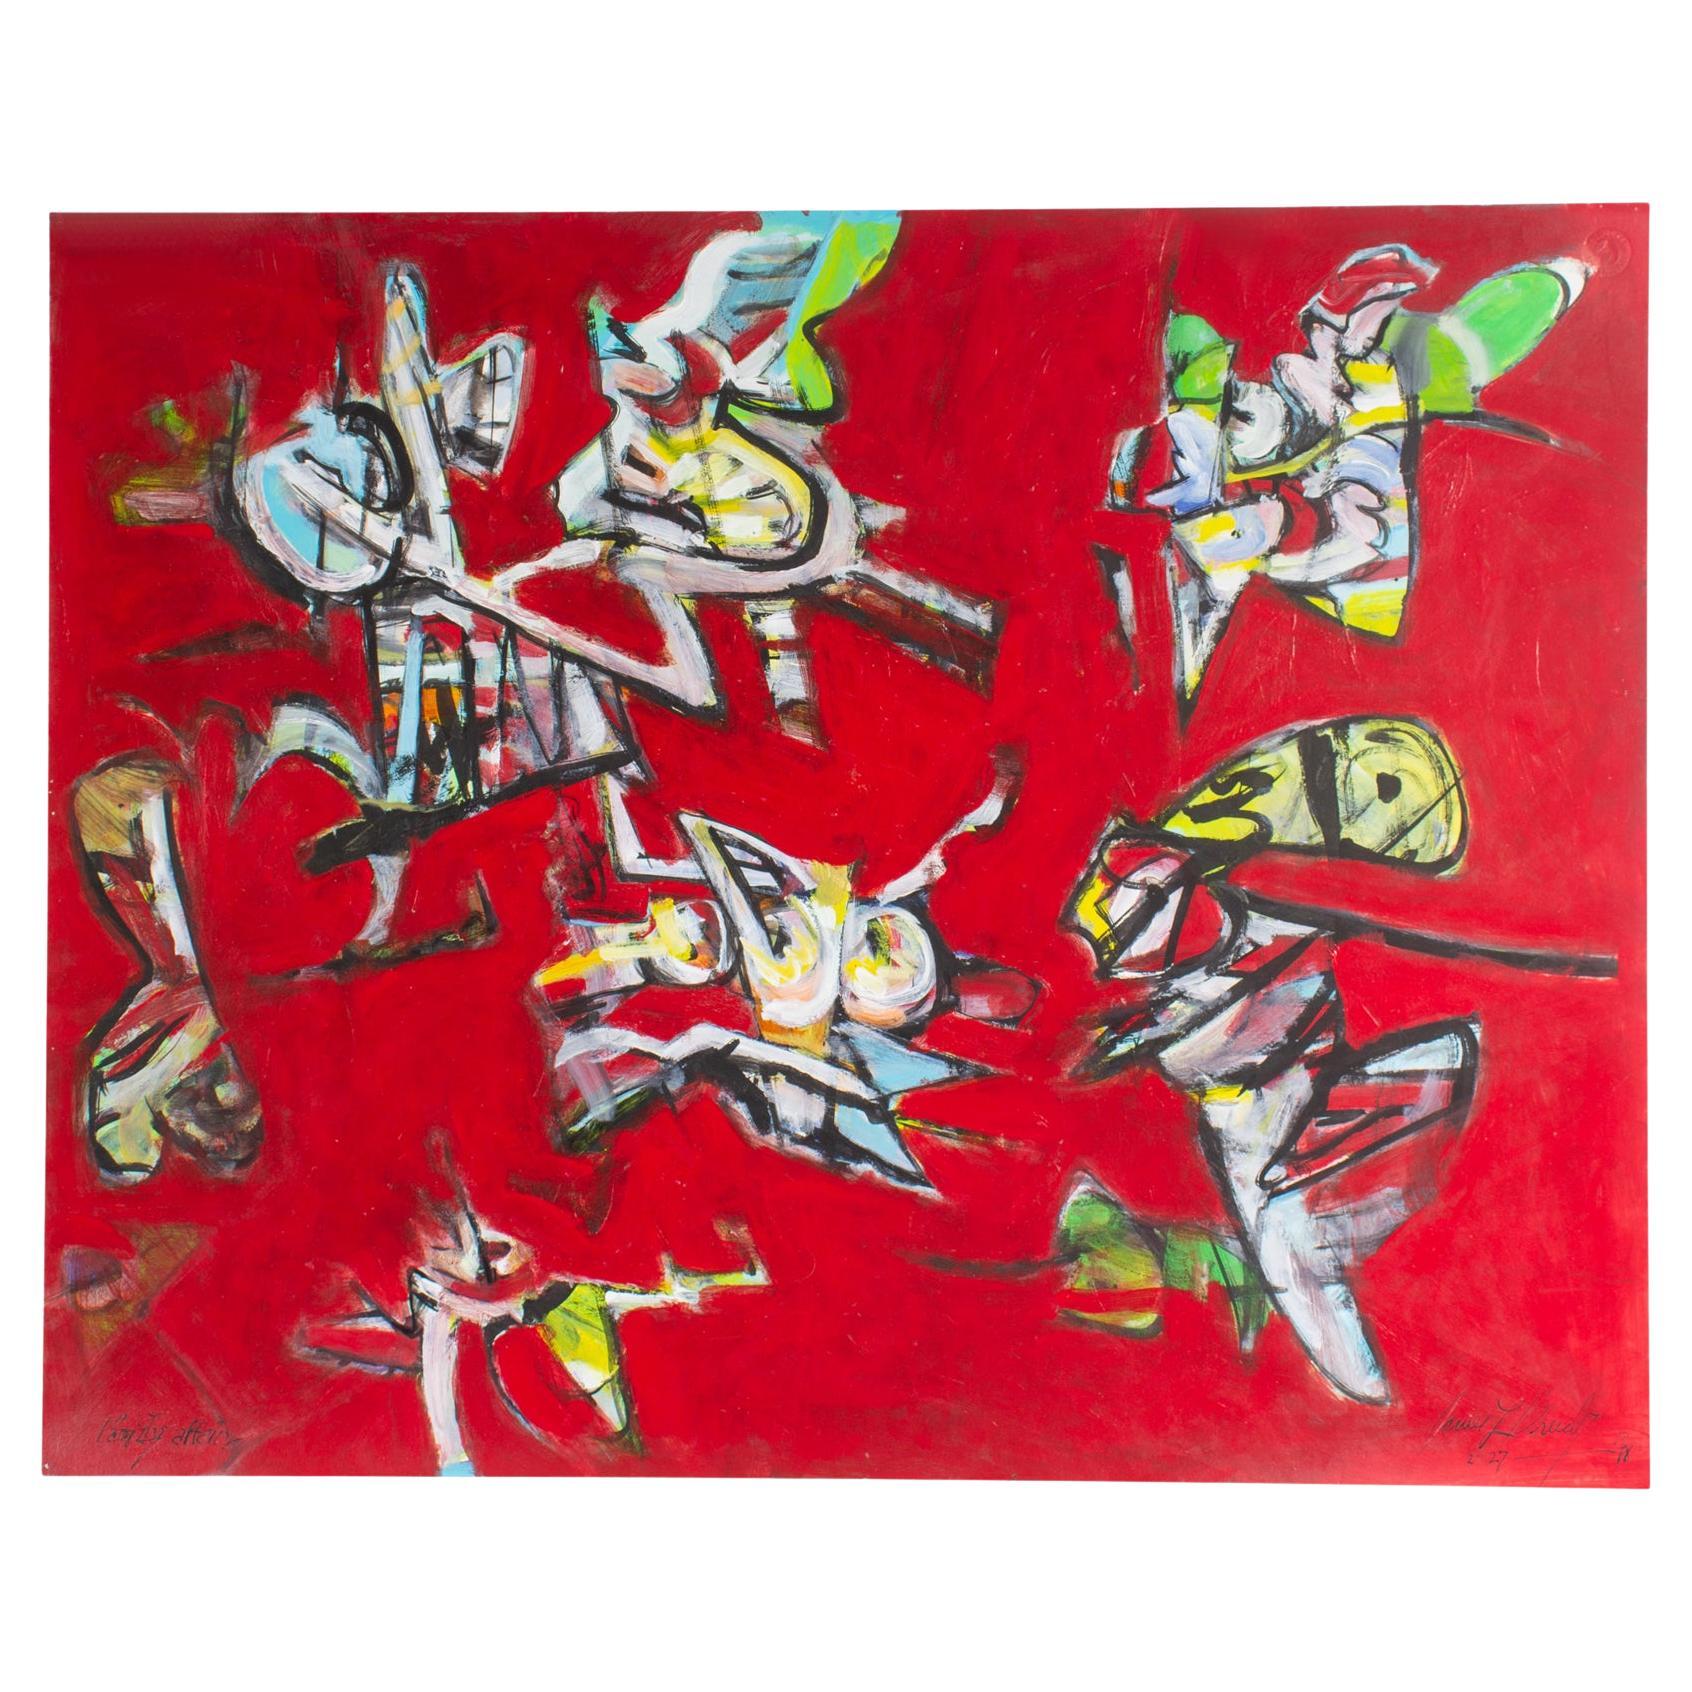 James L. Bruch Signed 2010 “Family Affair” Abstract Mixed Media Painting For Sale